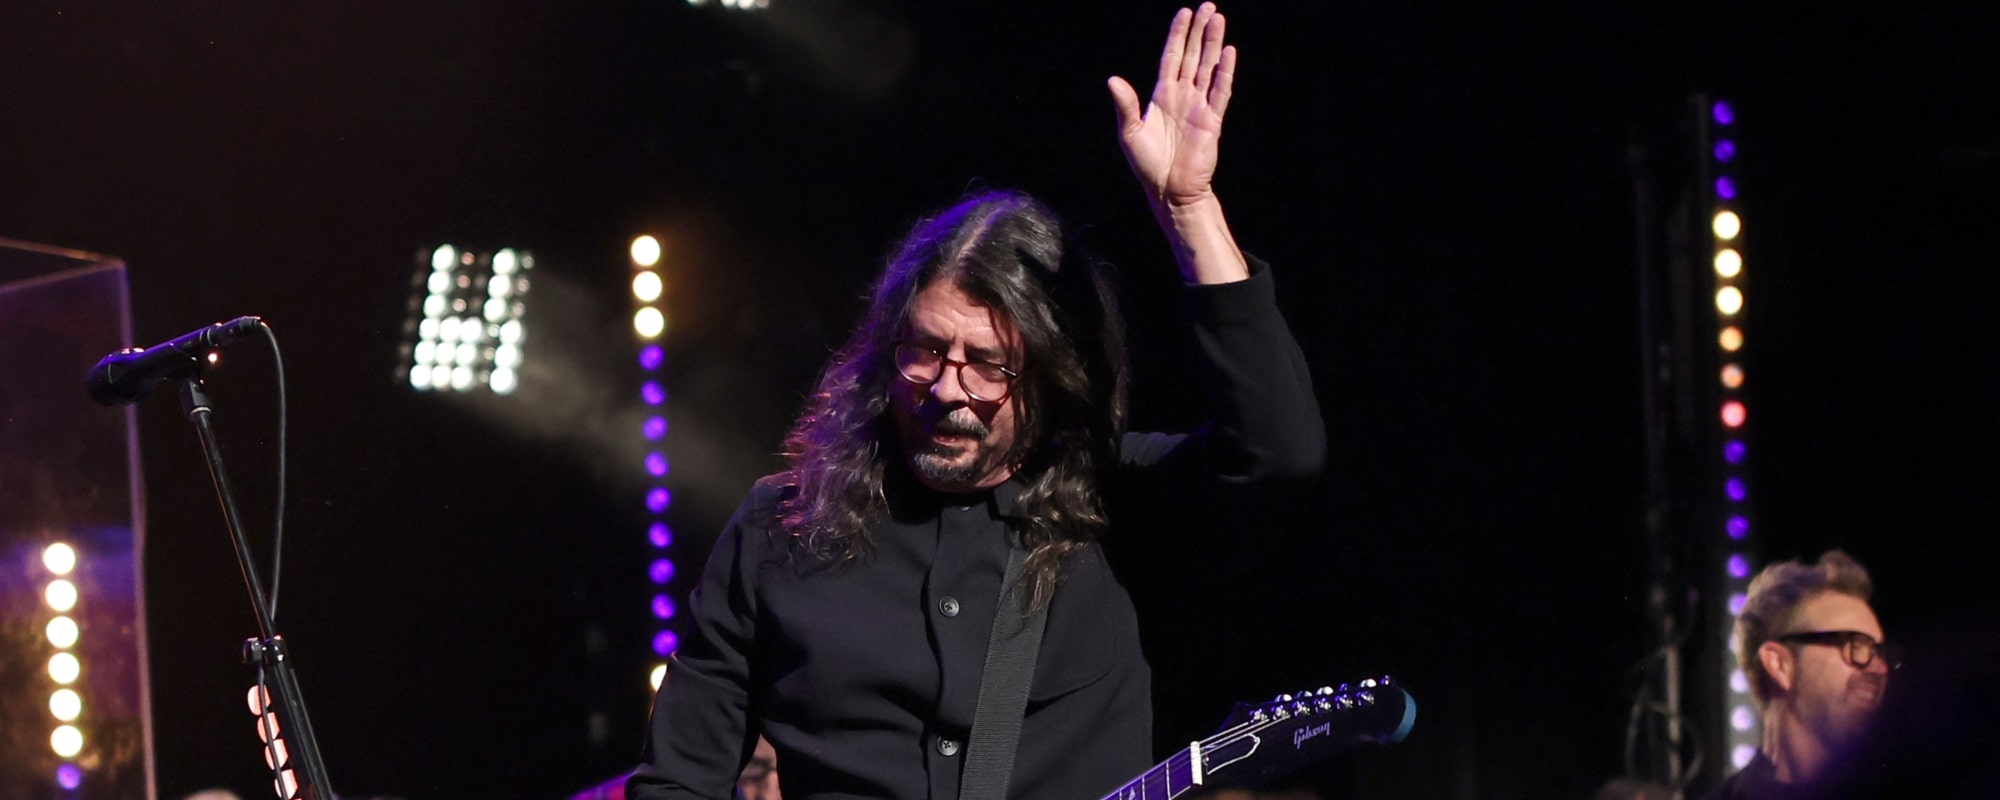 Watch Dave Grohl Cover “Live and Let Die” During the Love Rocks NYC Benefit Concert